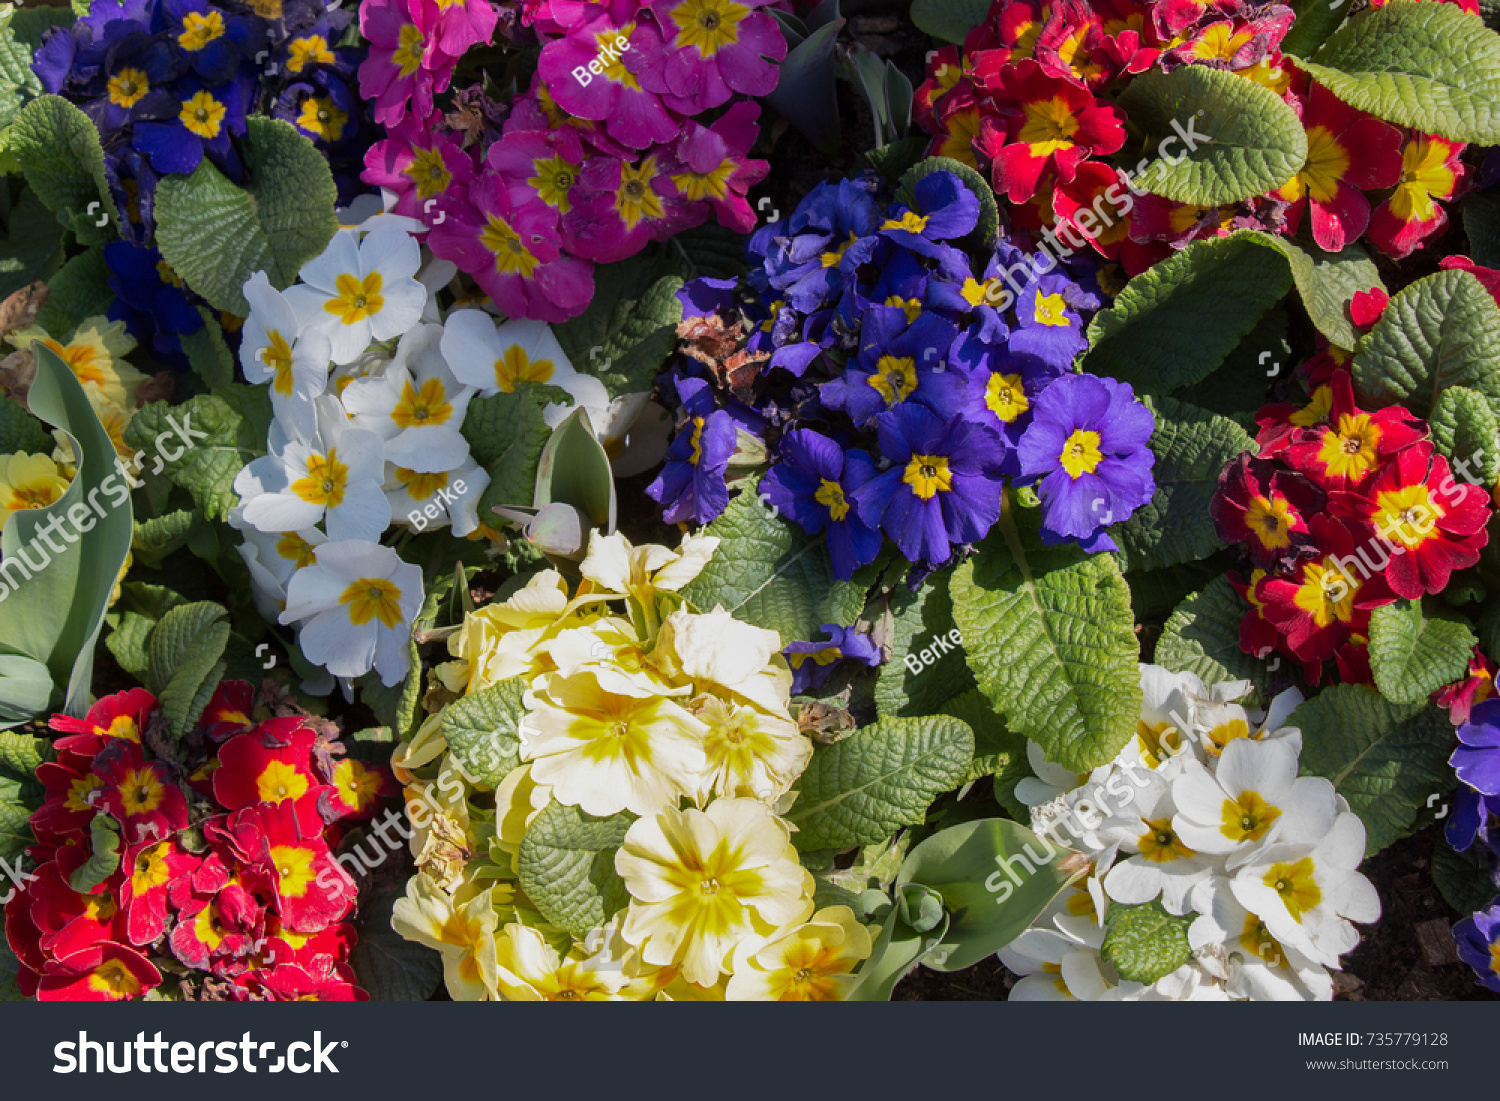 Blooming spring  flowers as a colorful background #735779128